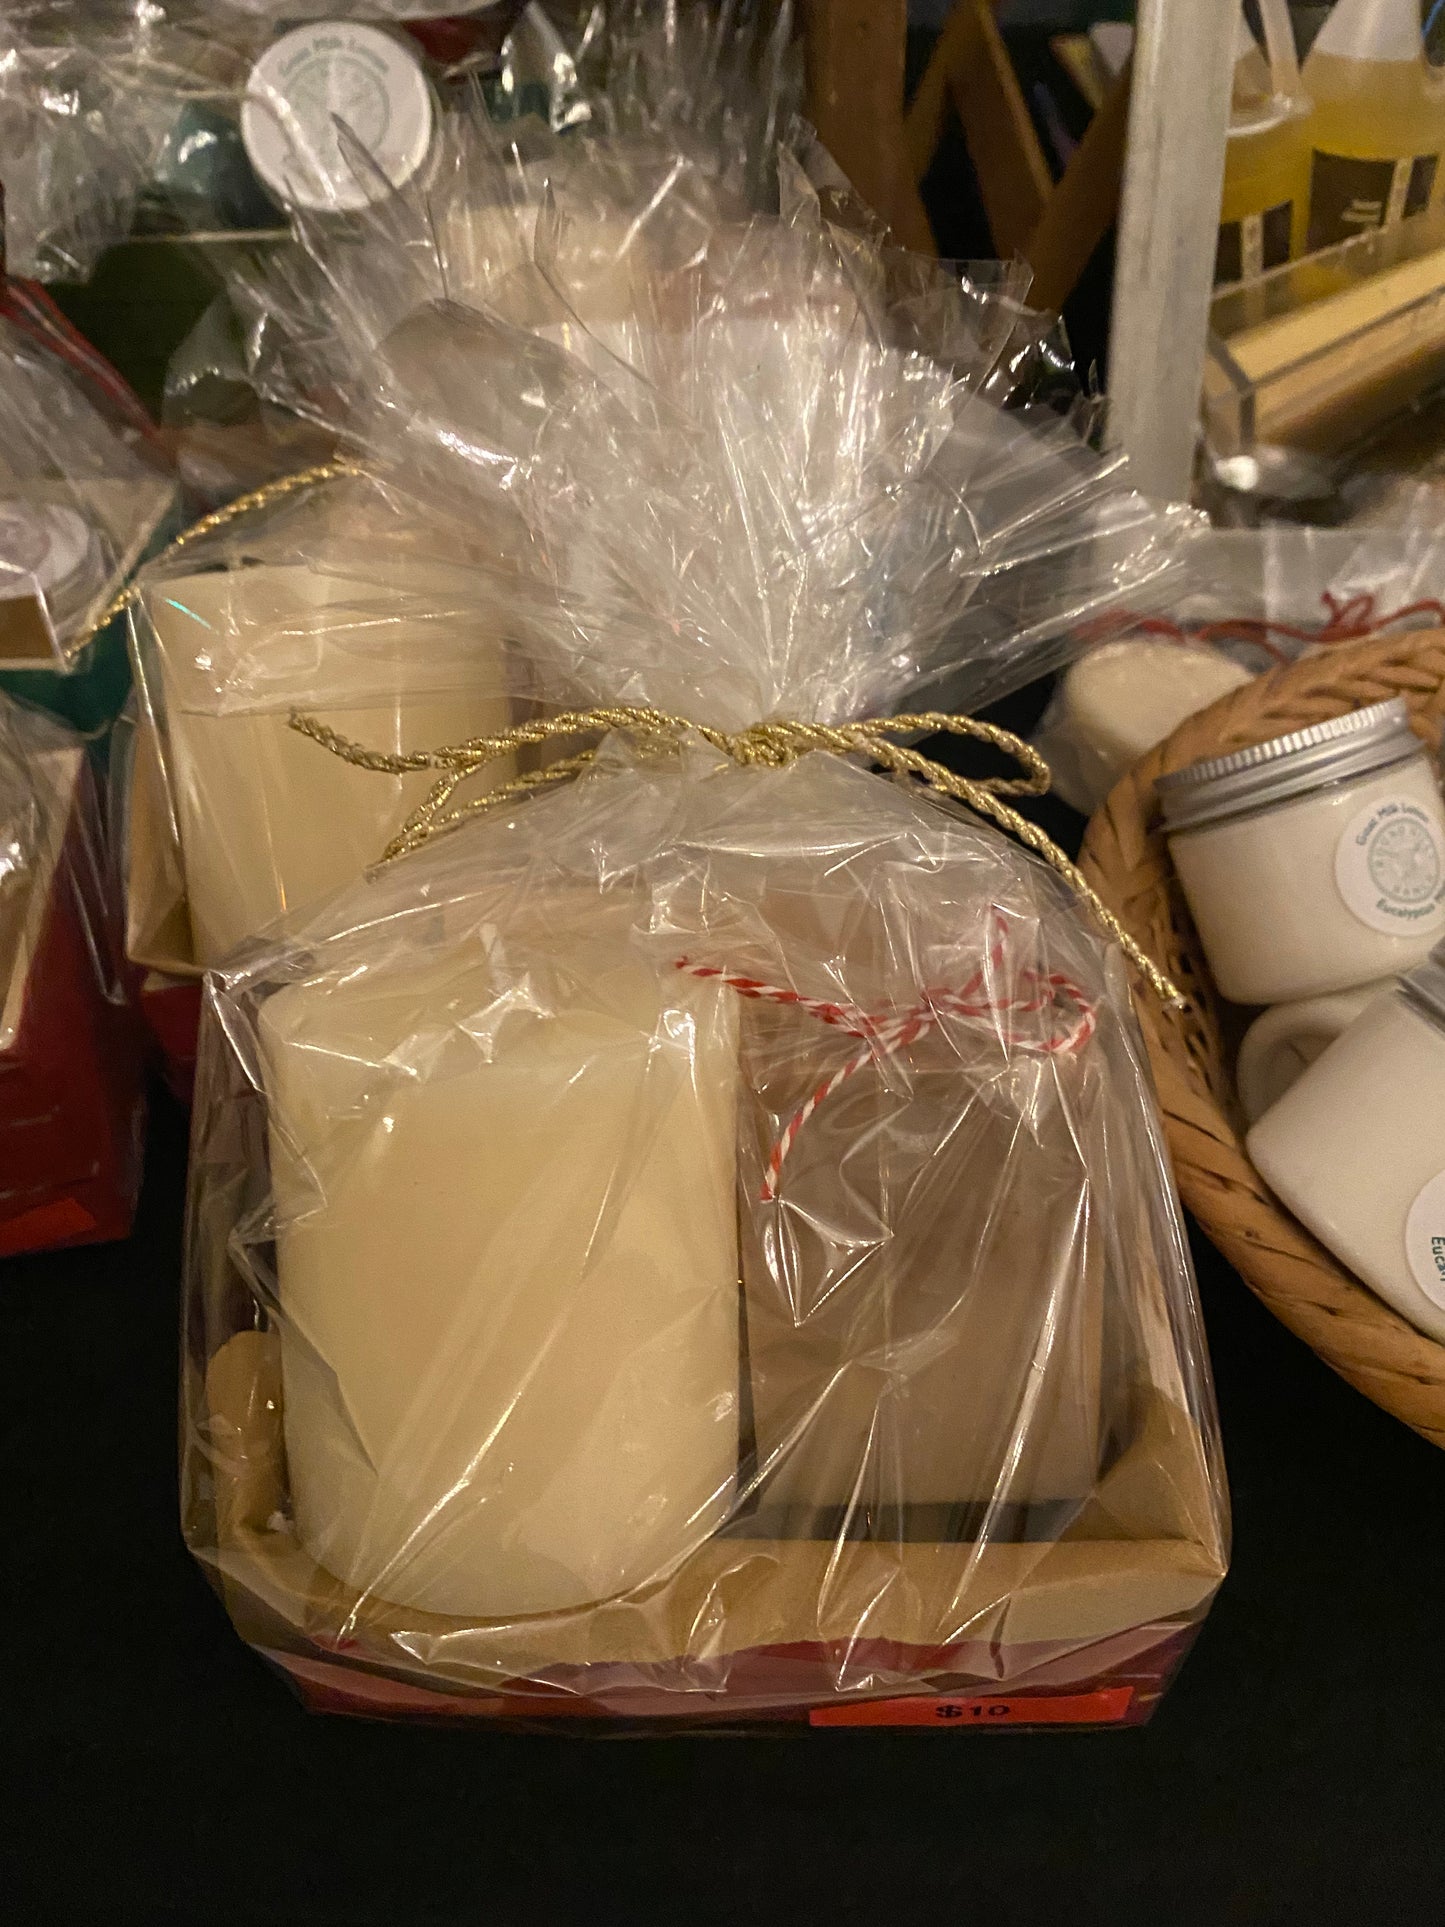 $10 Soap & Candle Crate